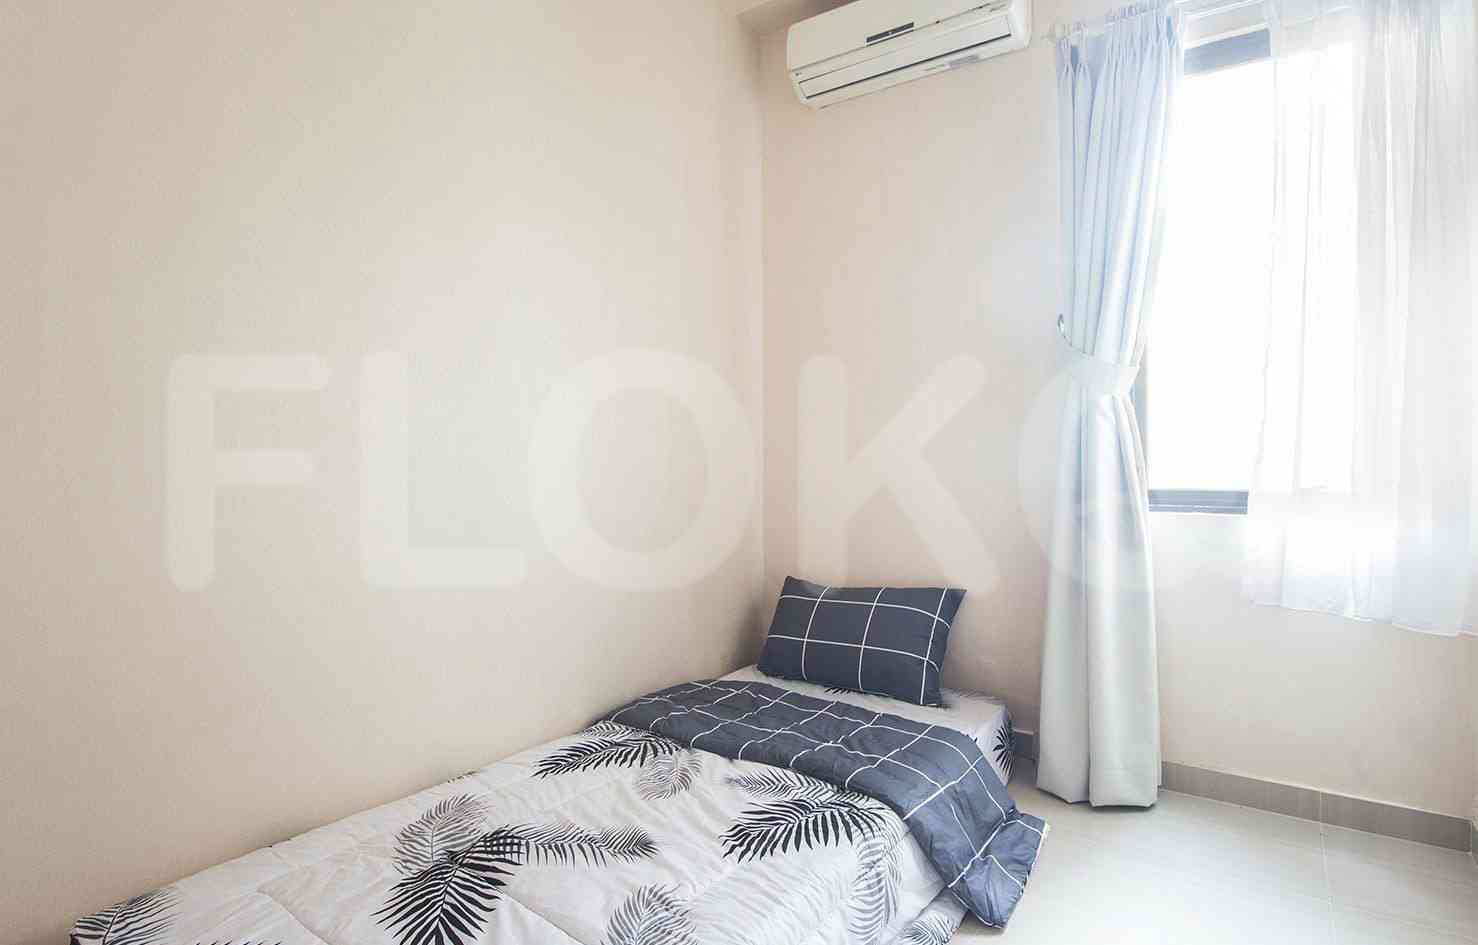 3 Bedroom on 38th Floor for Rent in Sudirman Park Apartment - ftad08 1